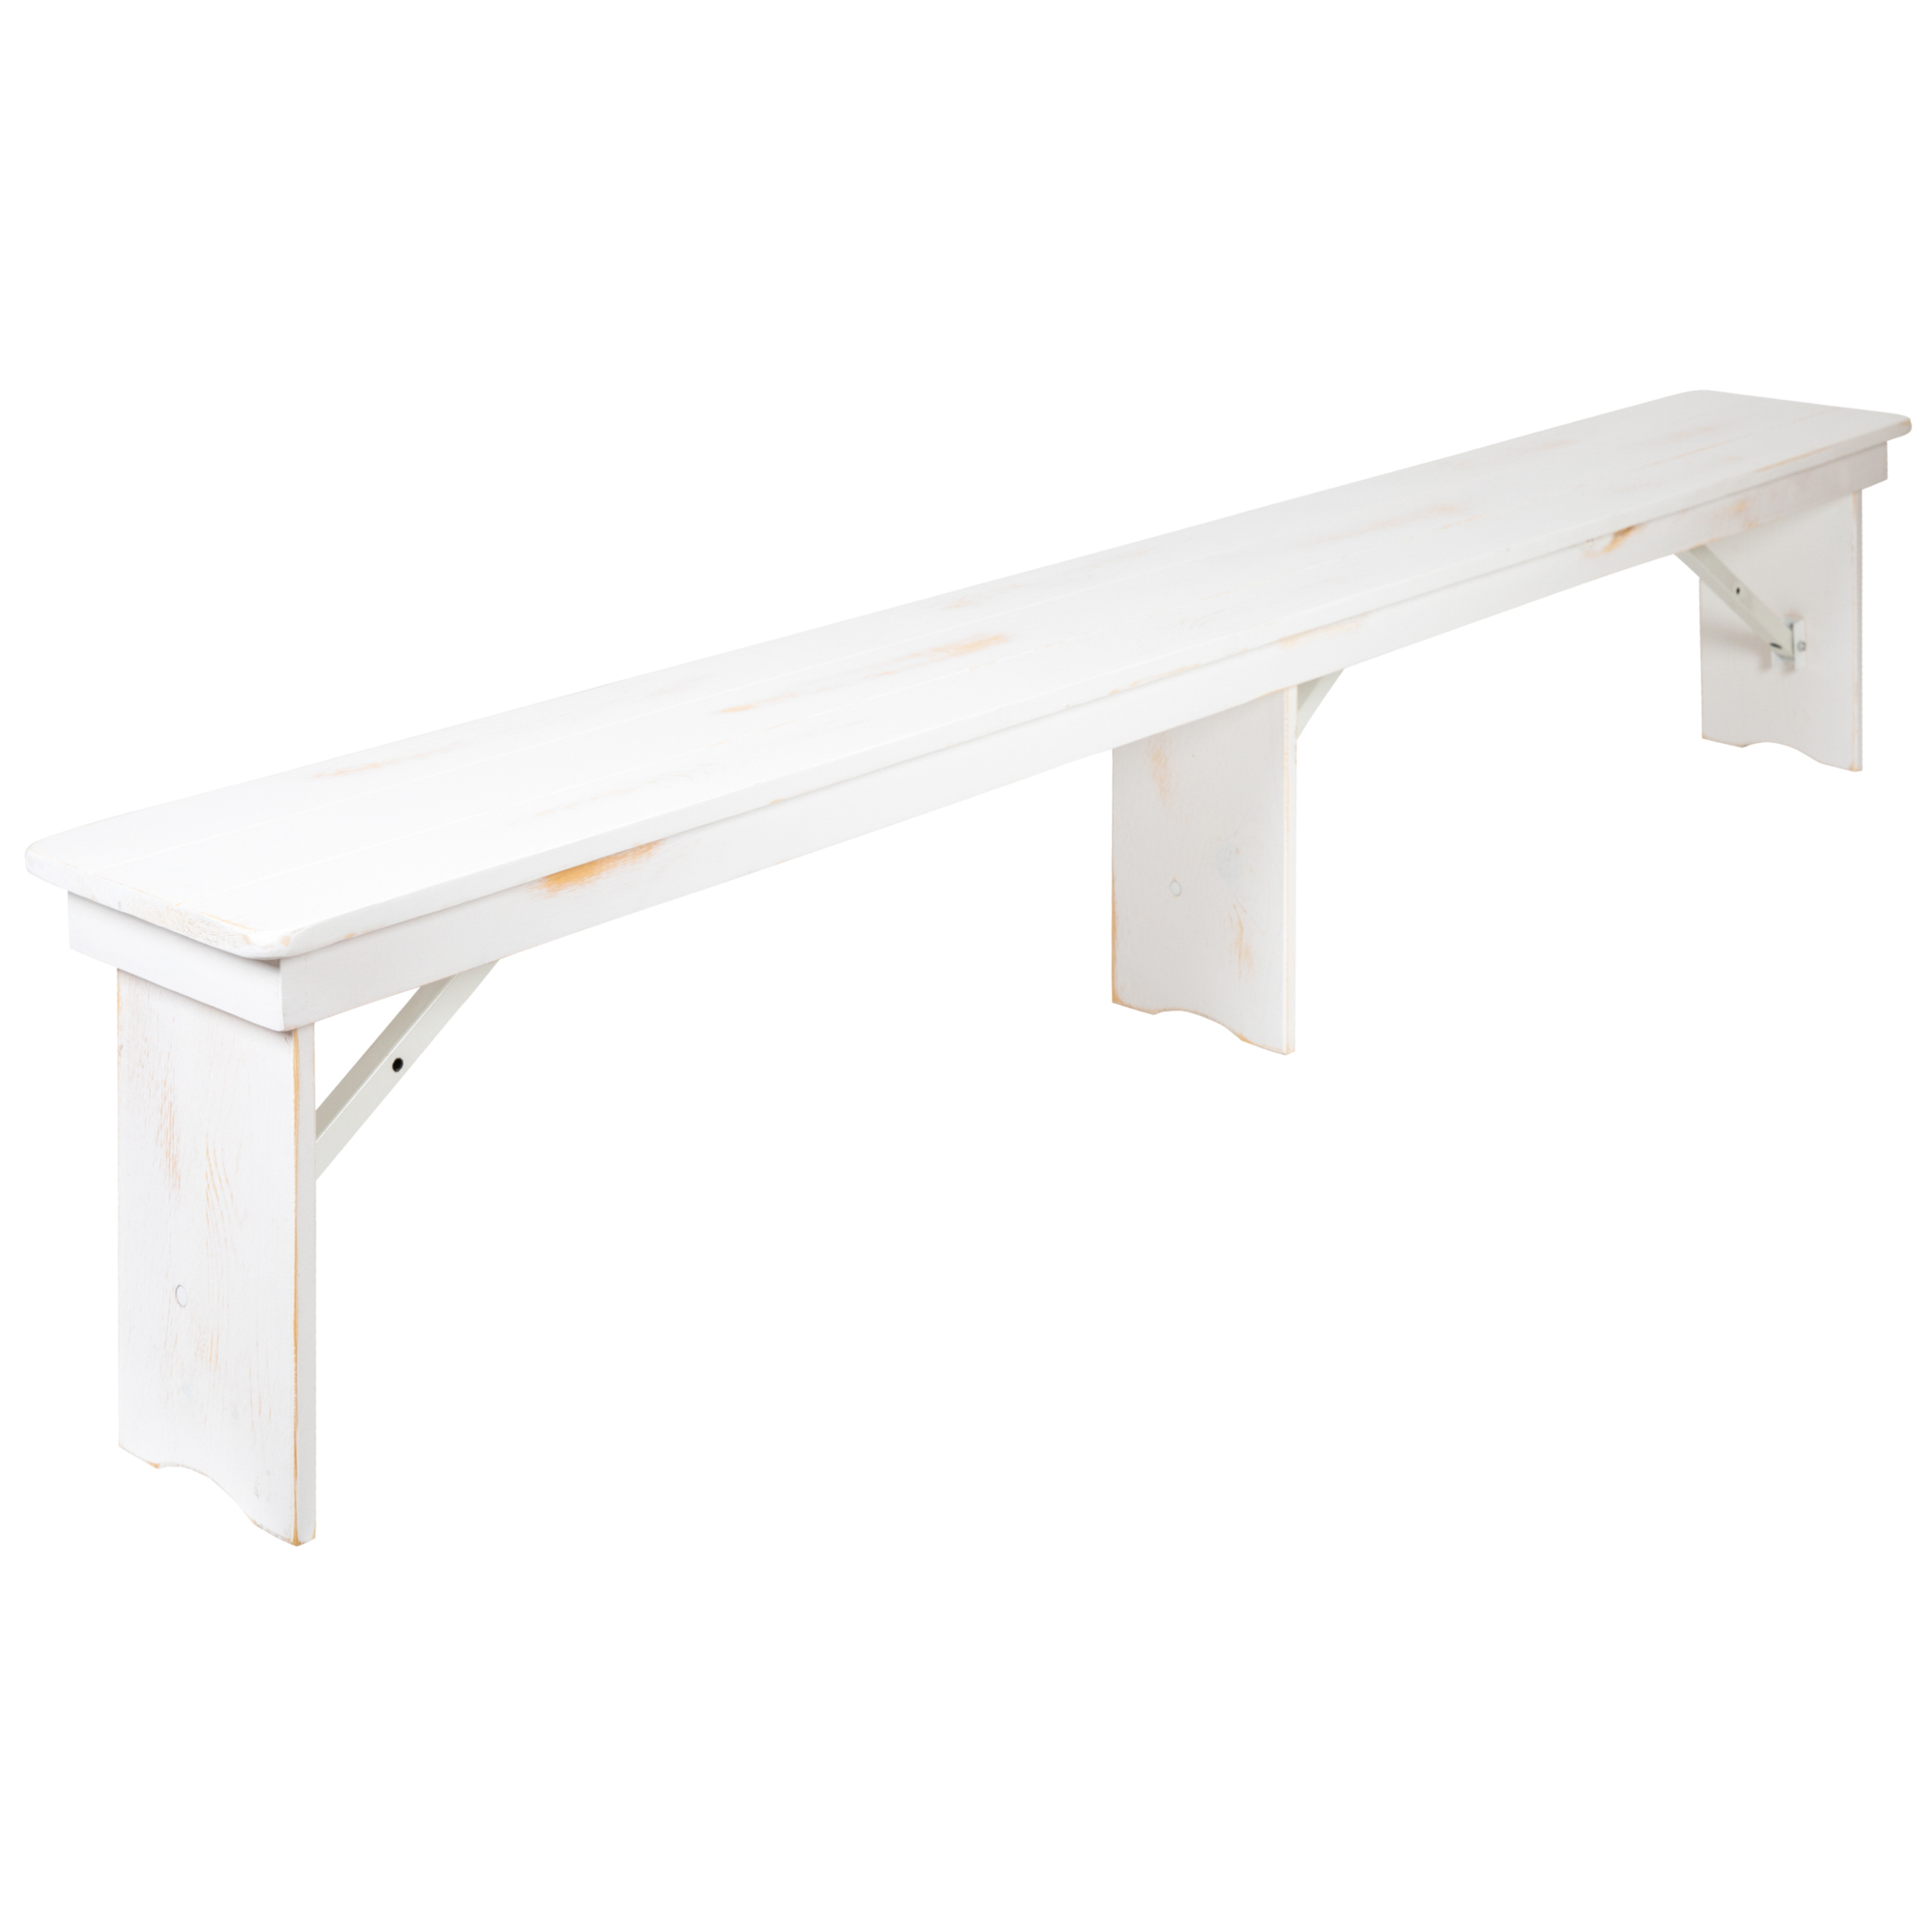 Flash Furniture, White 8ft.x12Inch Rustic Solid Pine Folding 3 Leg Bench, Primary Color White, Included (qty.) 1 Model XAB96X12LWH